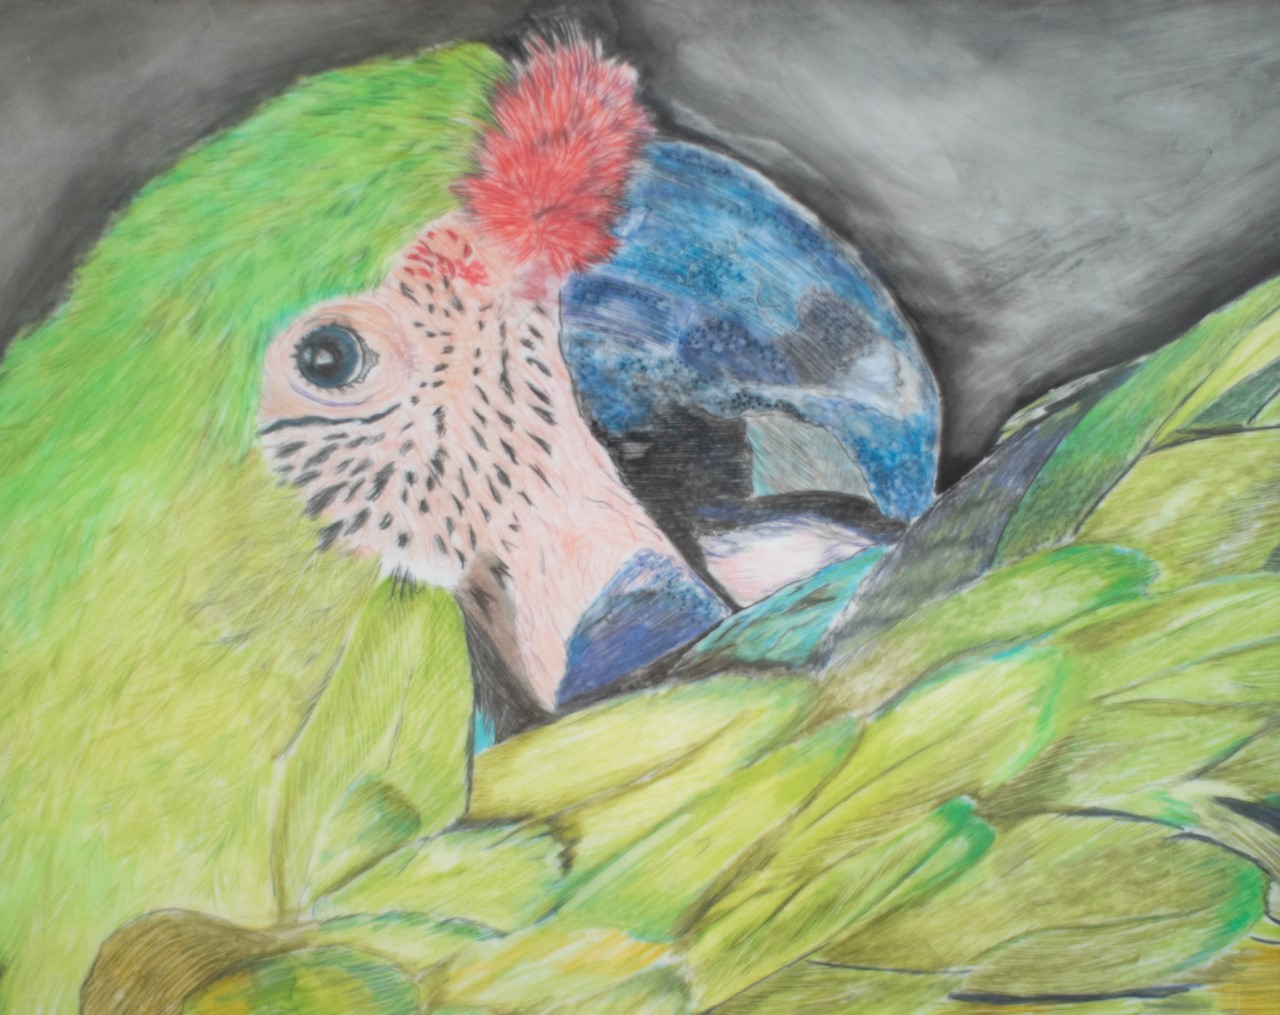 Masterful Drawing: Charcoal and Colored Pencils - Sage Oak Charter Schools